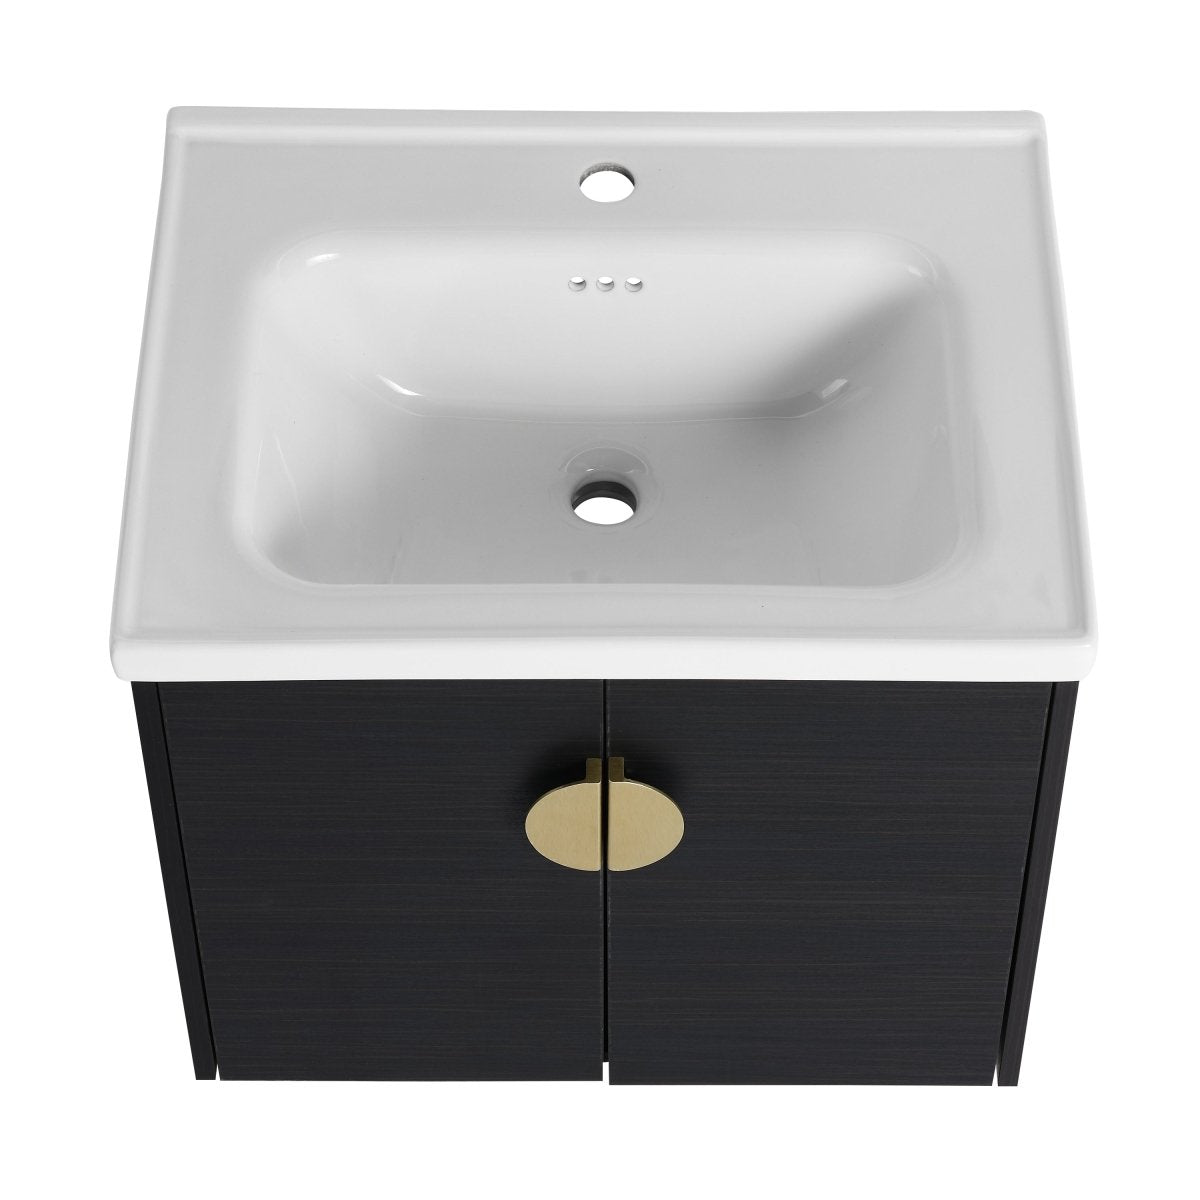 Exbrite 24 Inch Soft Close Doors Bathroom Vanity With Sink, For Small Bathroom,BVC06324BCT(KD-Packing) - ExBriteUSA